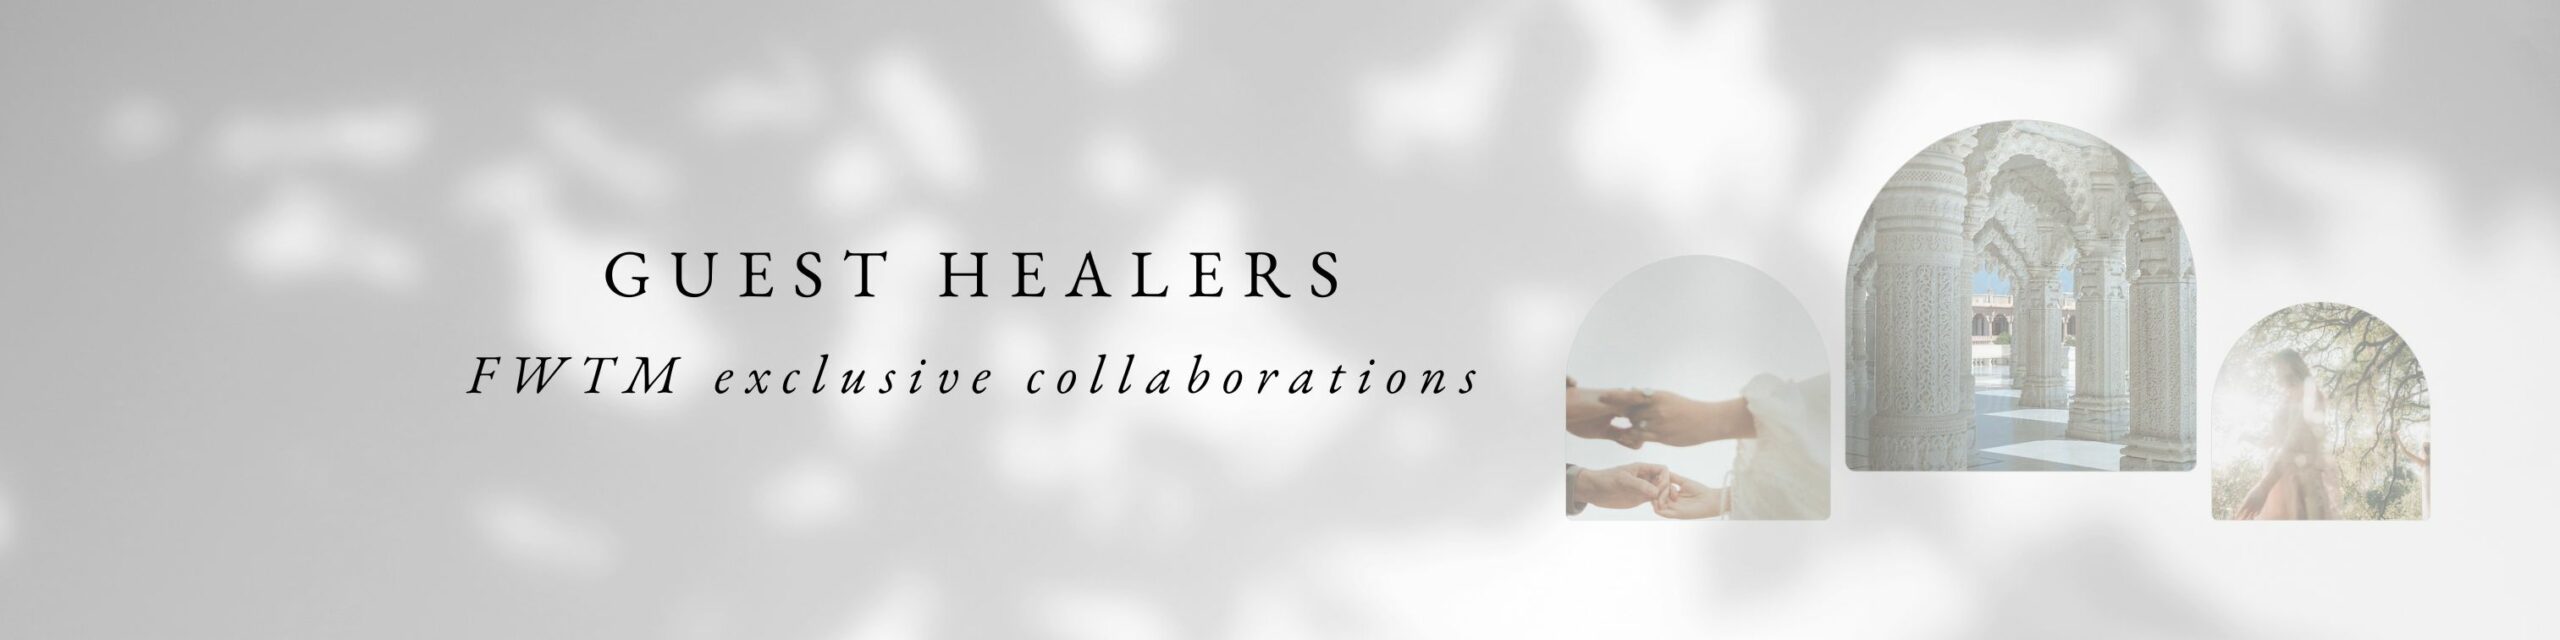 Guest Healers Banner